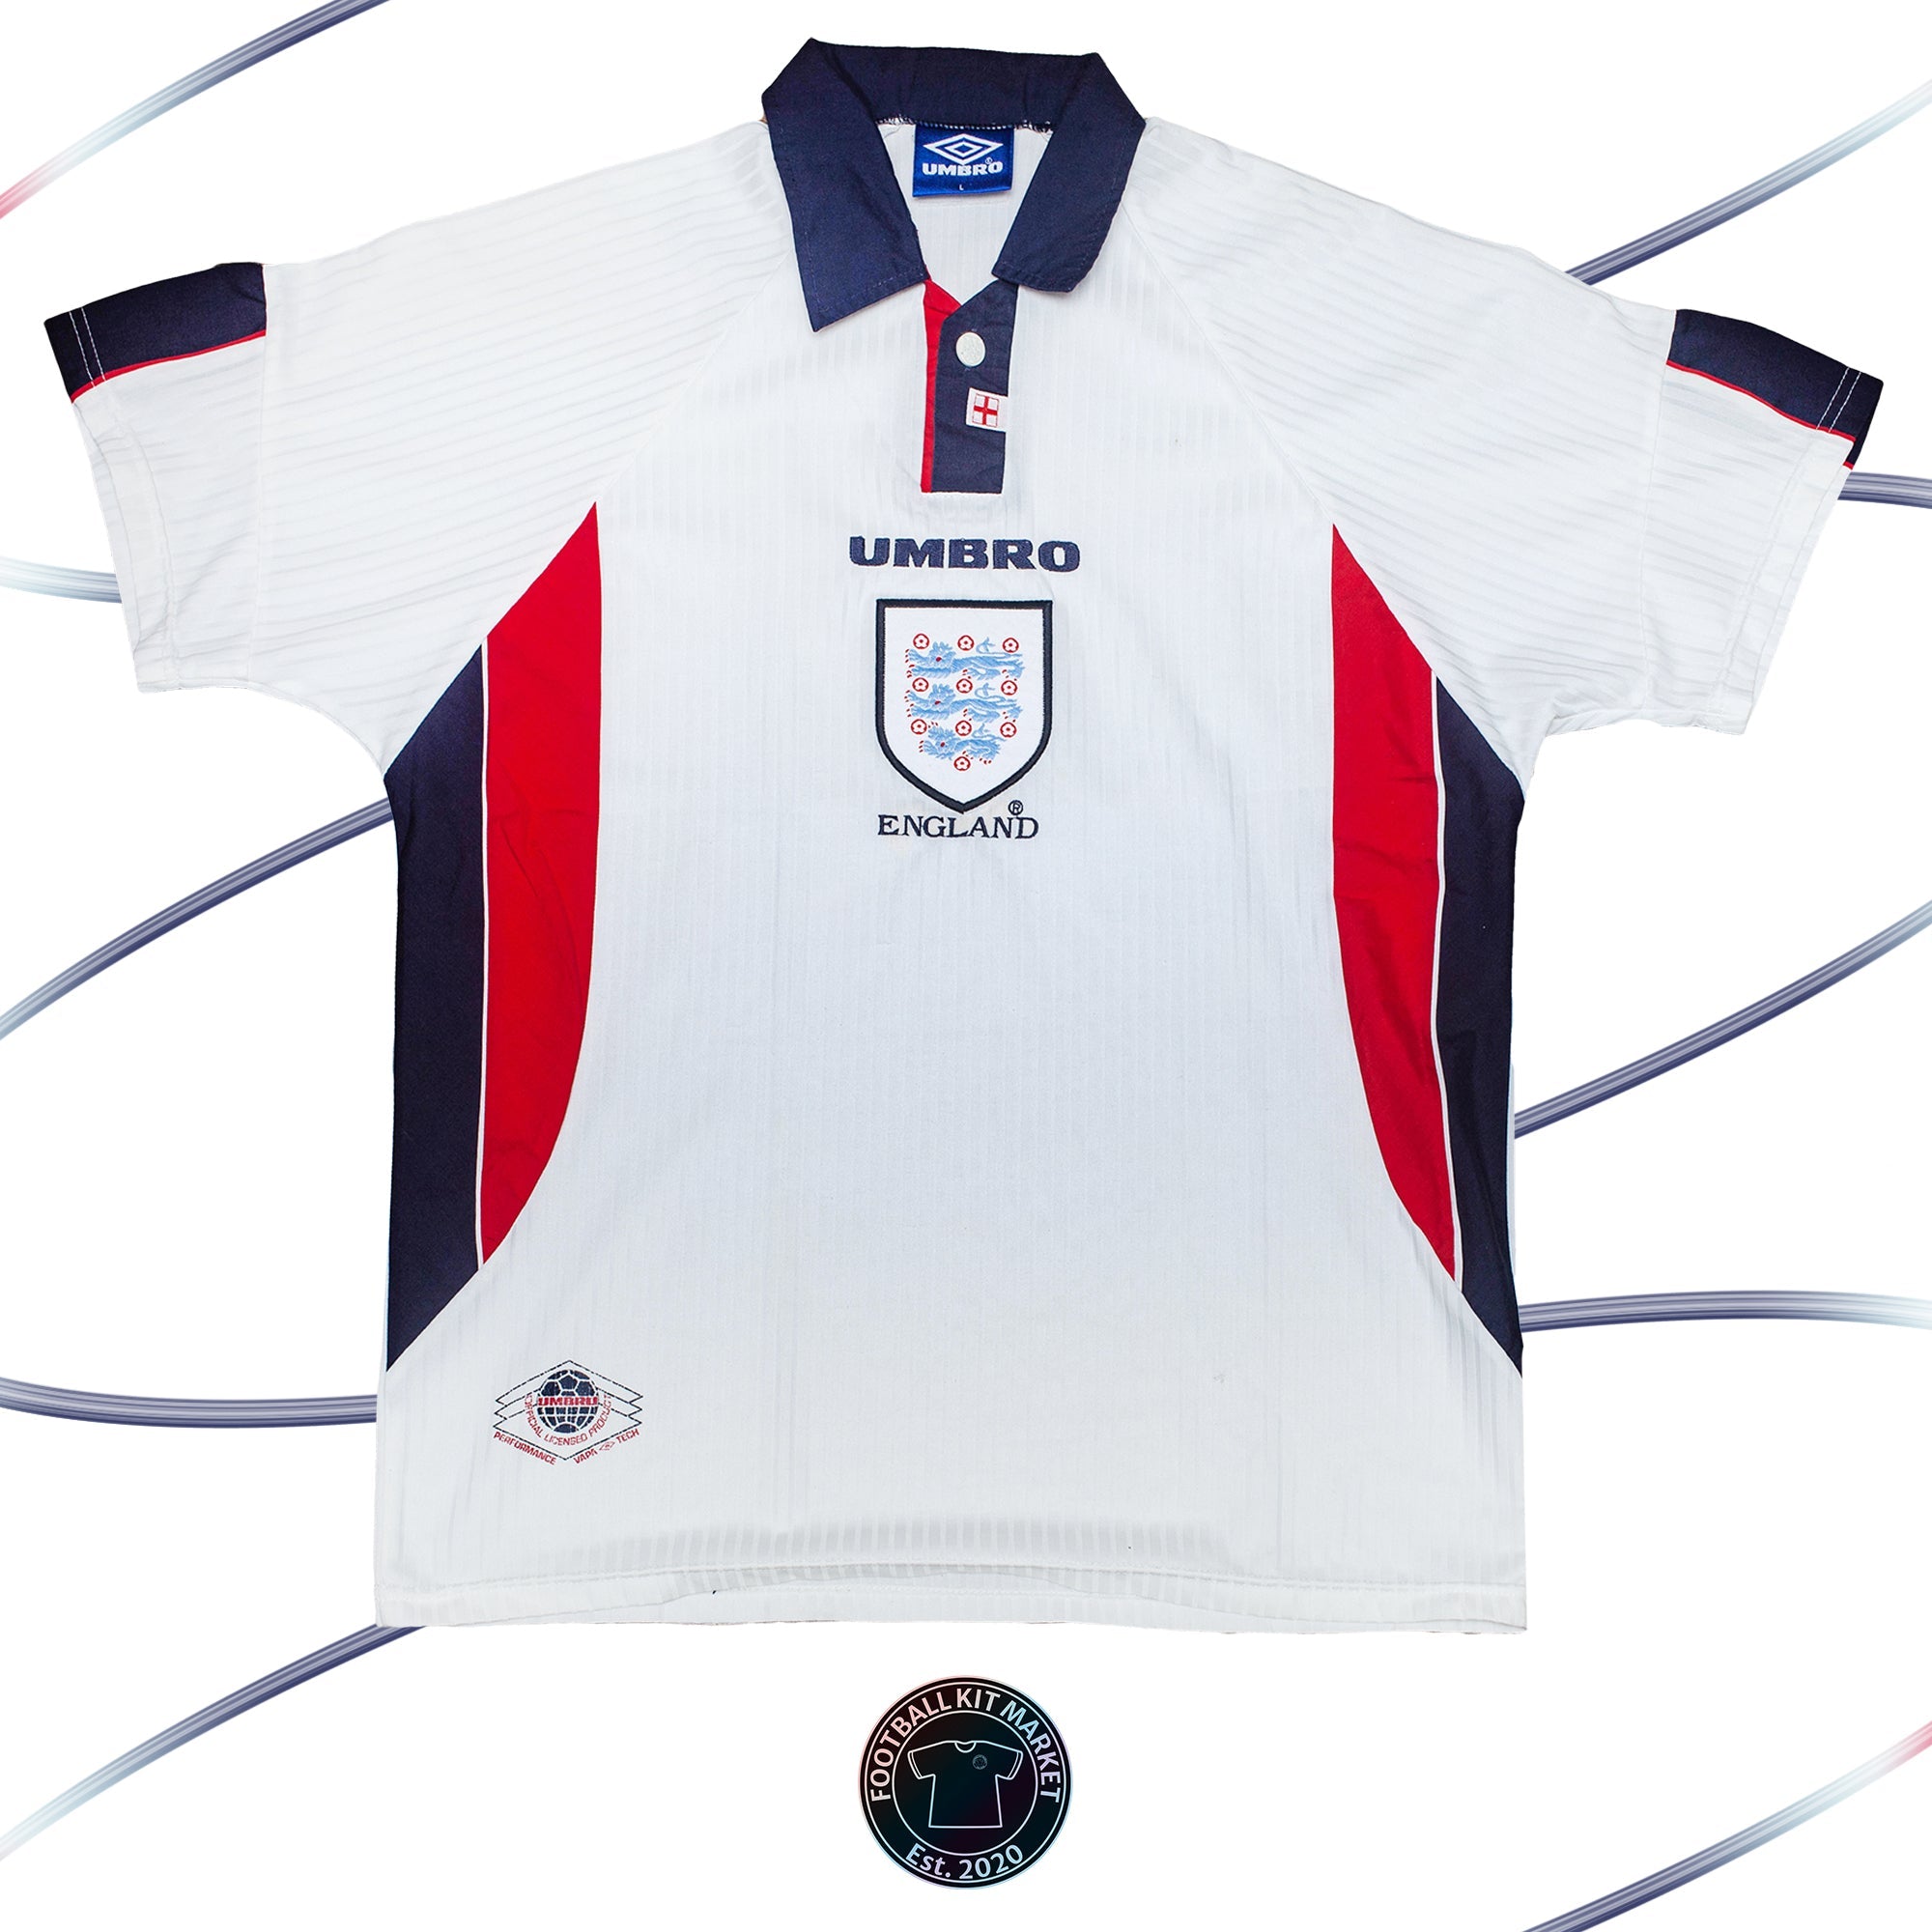 Genuine ENGLAND Home (1997-1999) - UMBRO (L) - Product Image from Football Kit Market